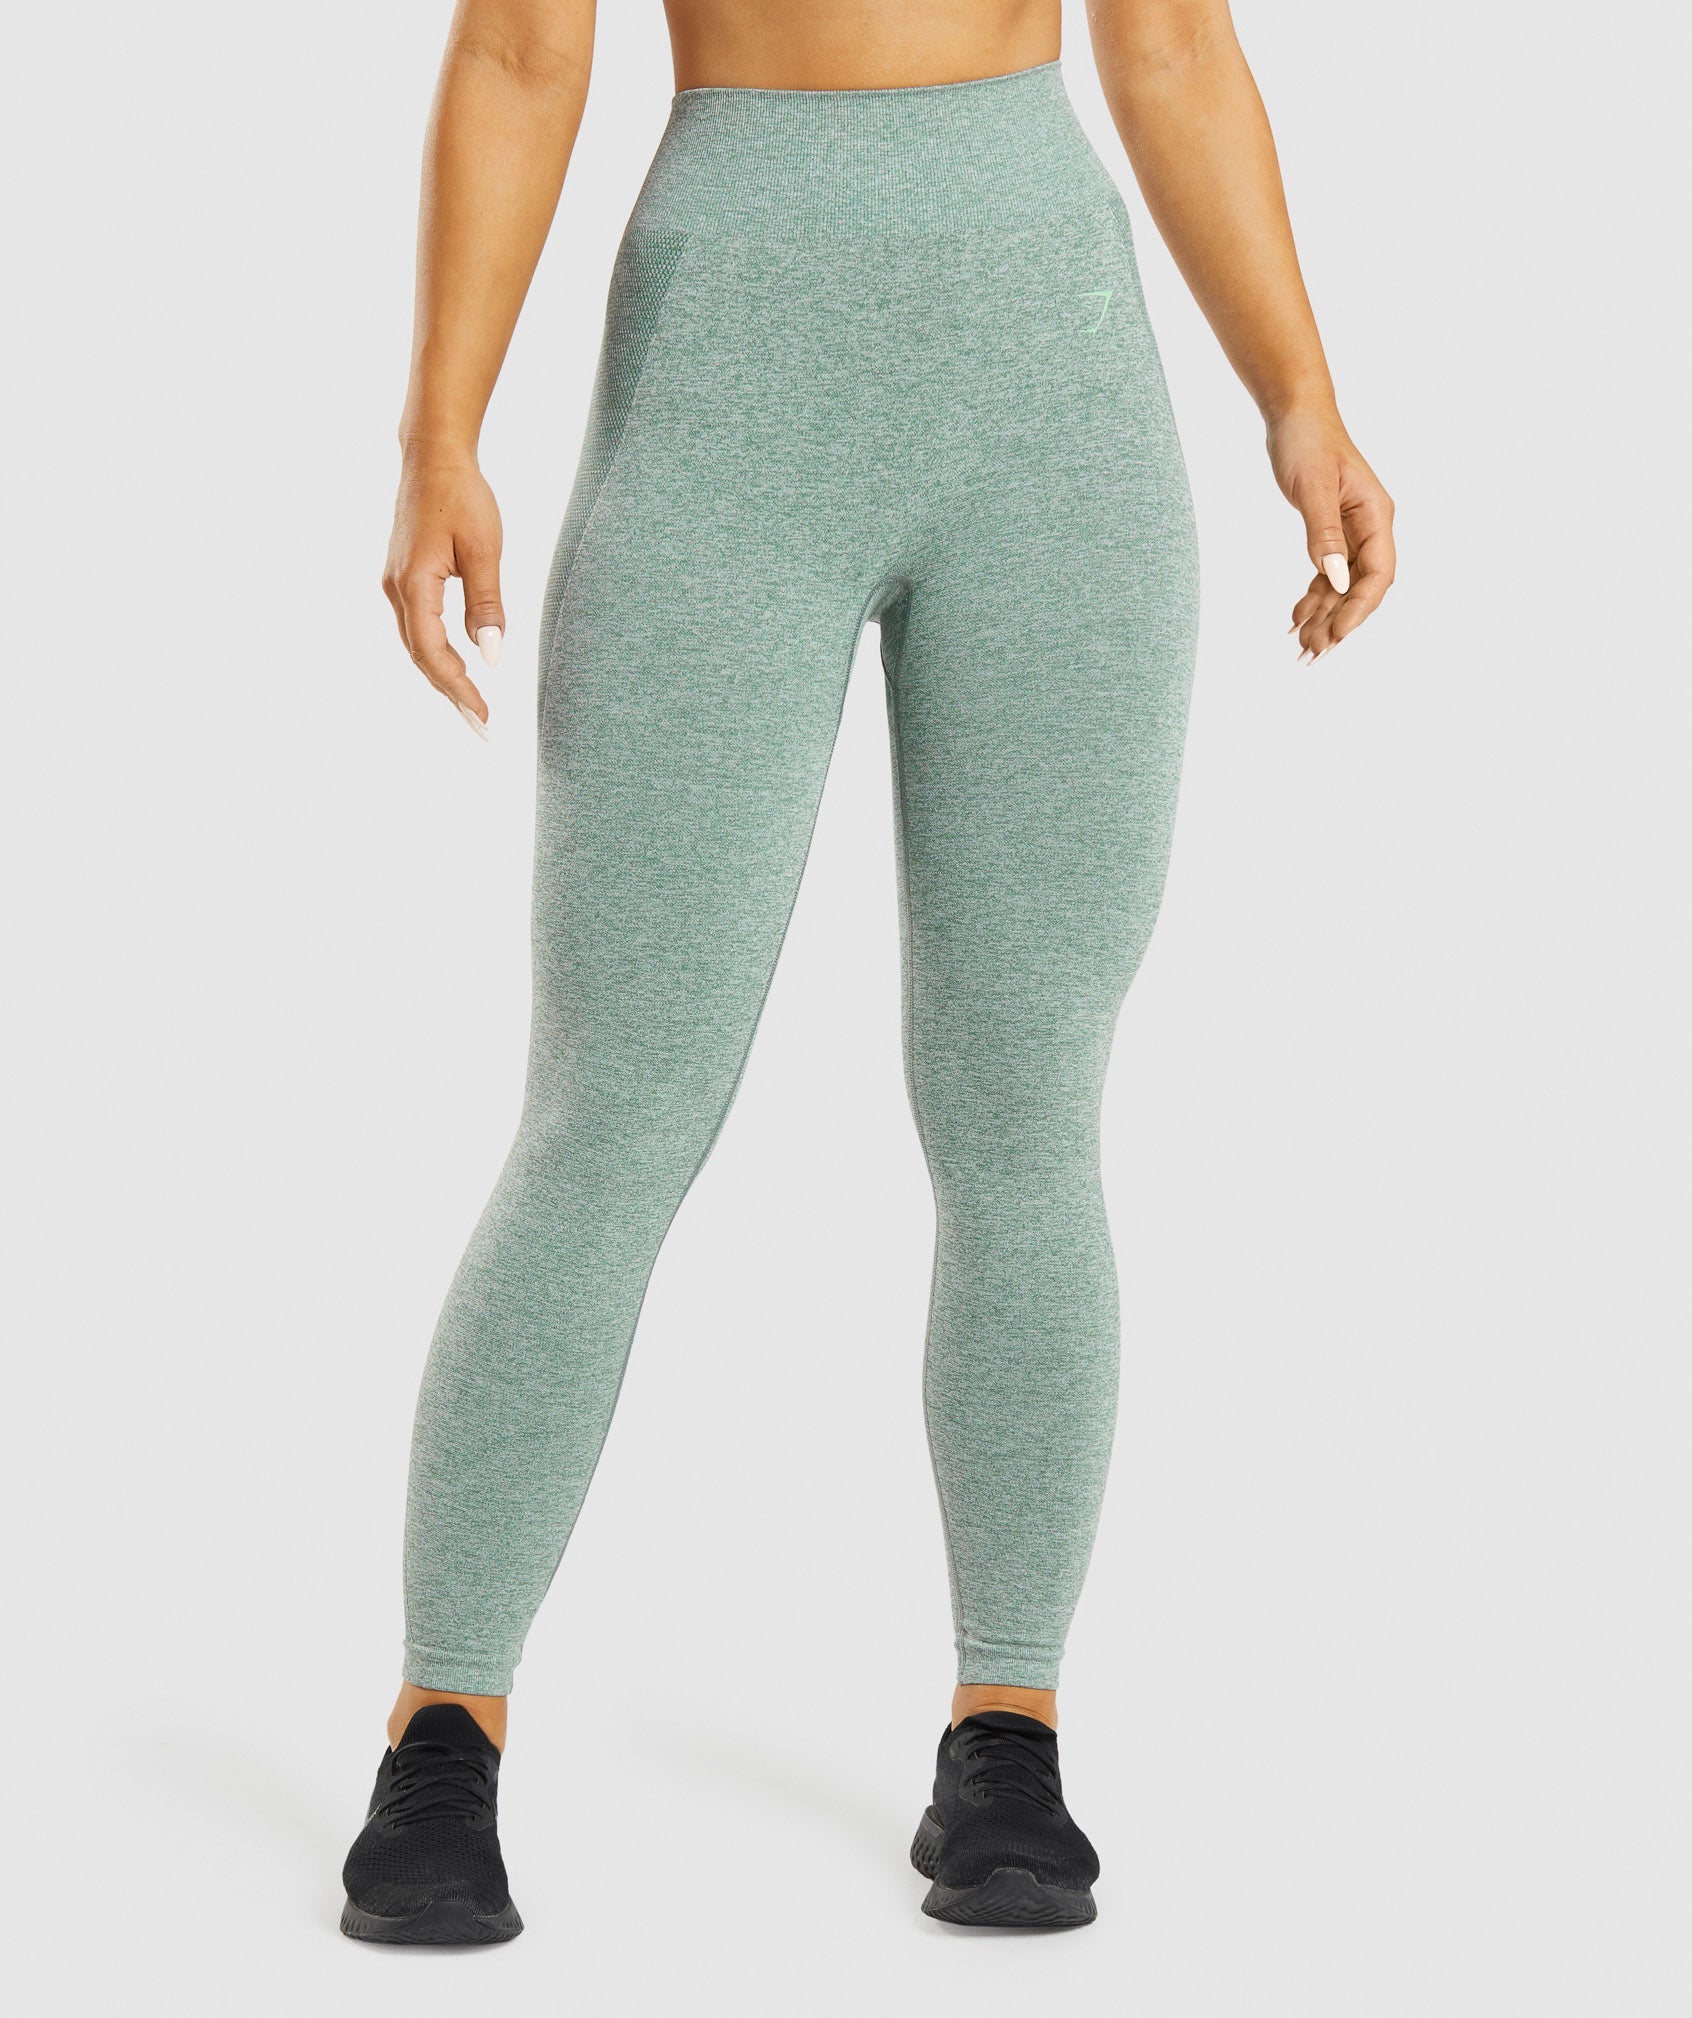 Bestselling High-Waisted Leggings Are On Sale For 36% Off